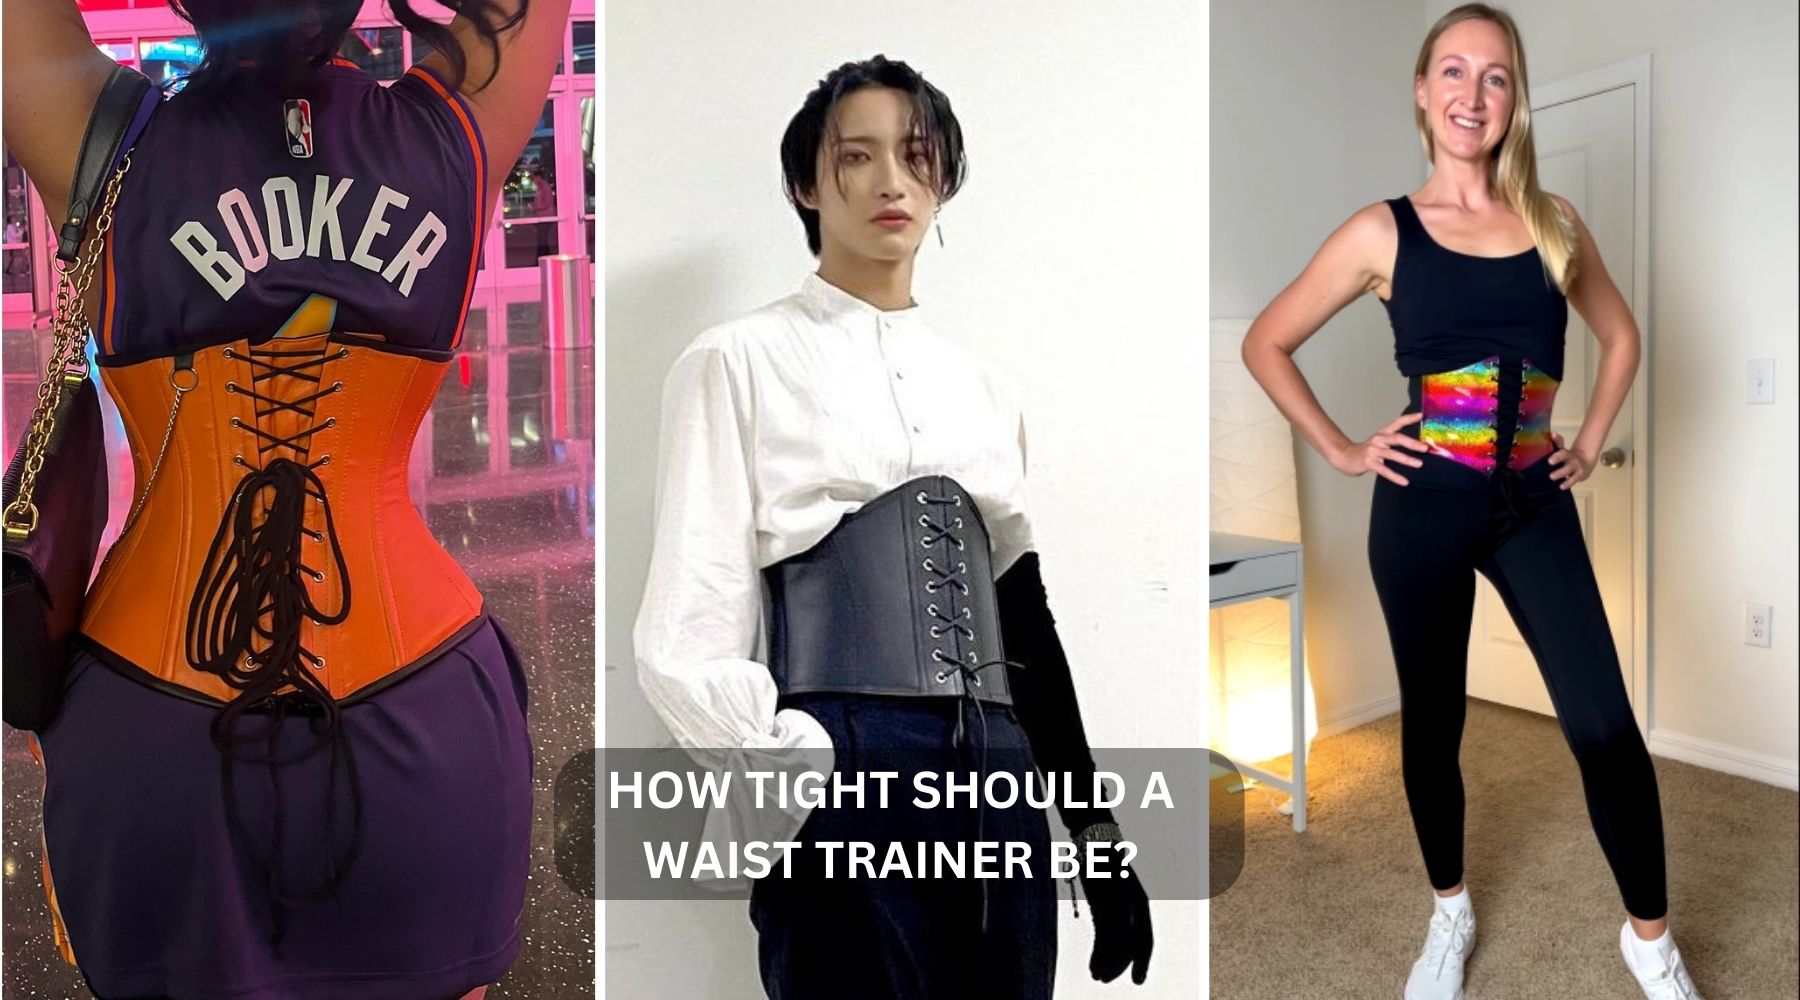 Can you wear your waist trainer under your clothes. #fyp #health #beau